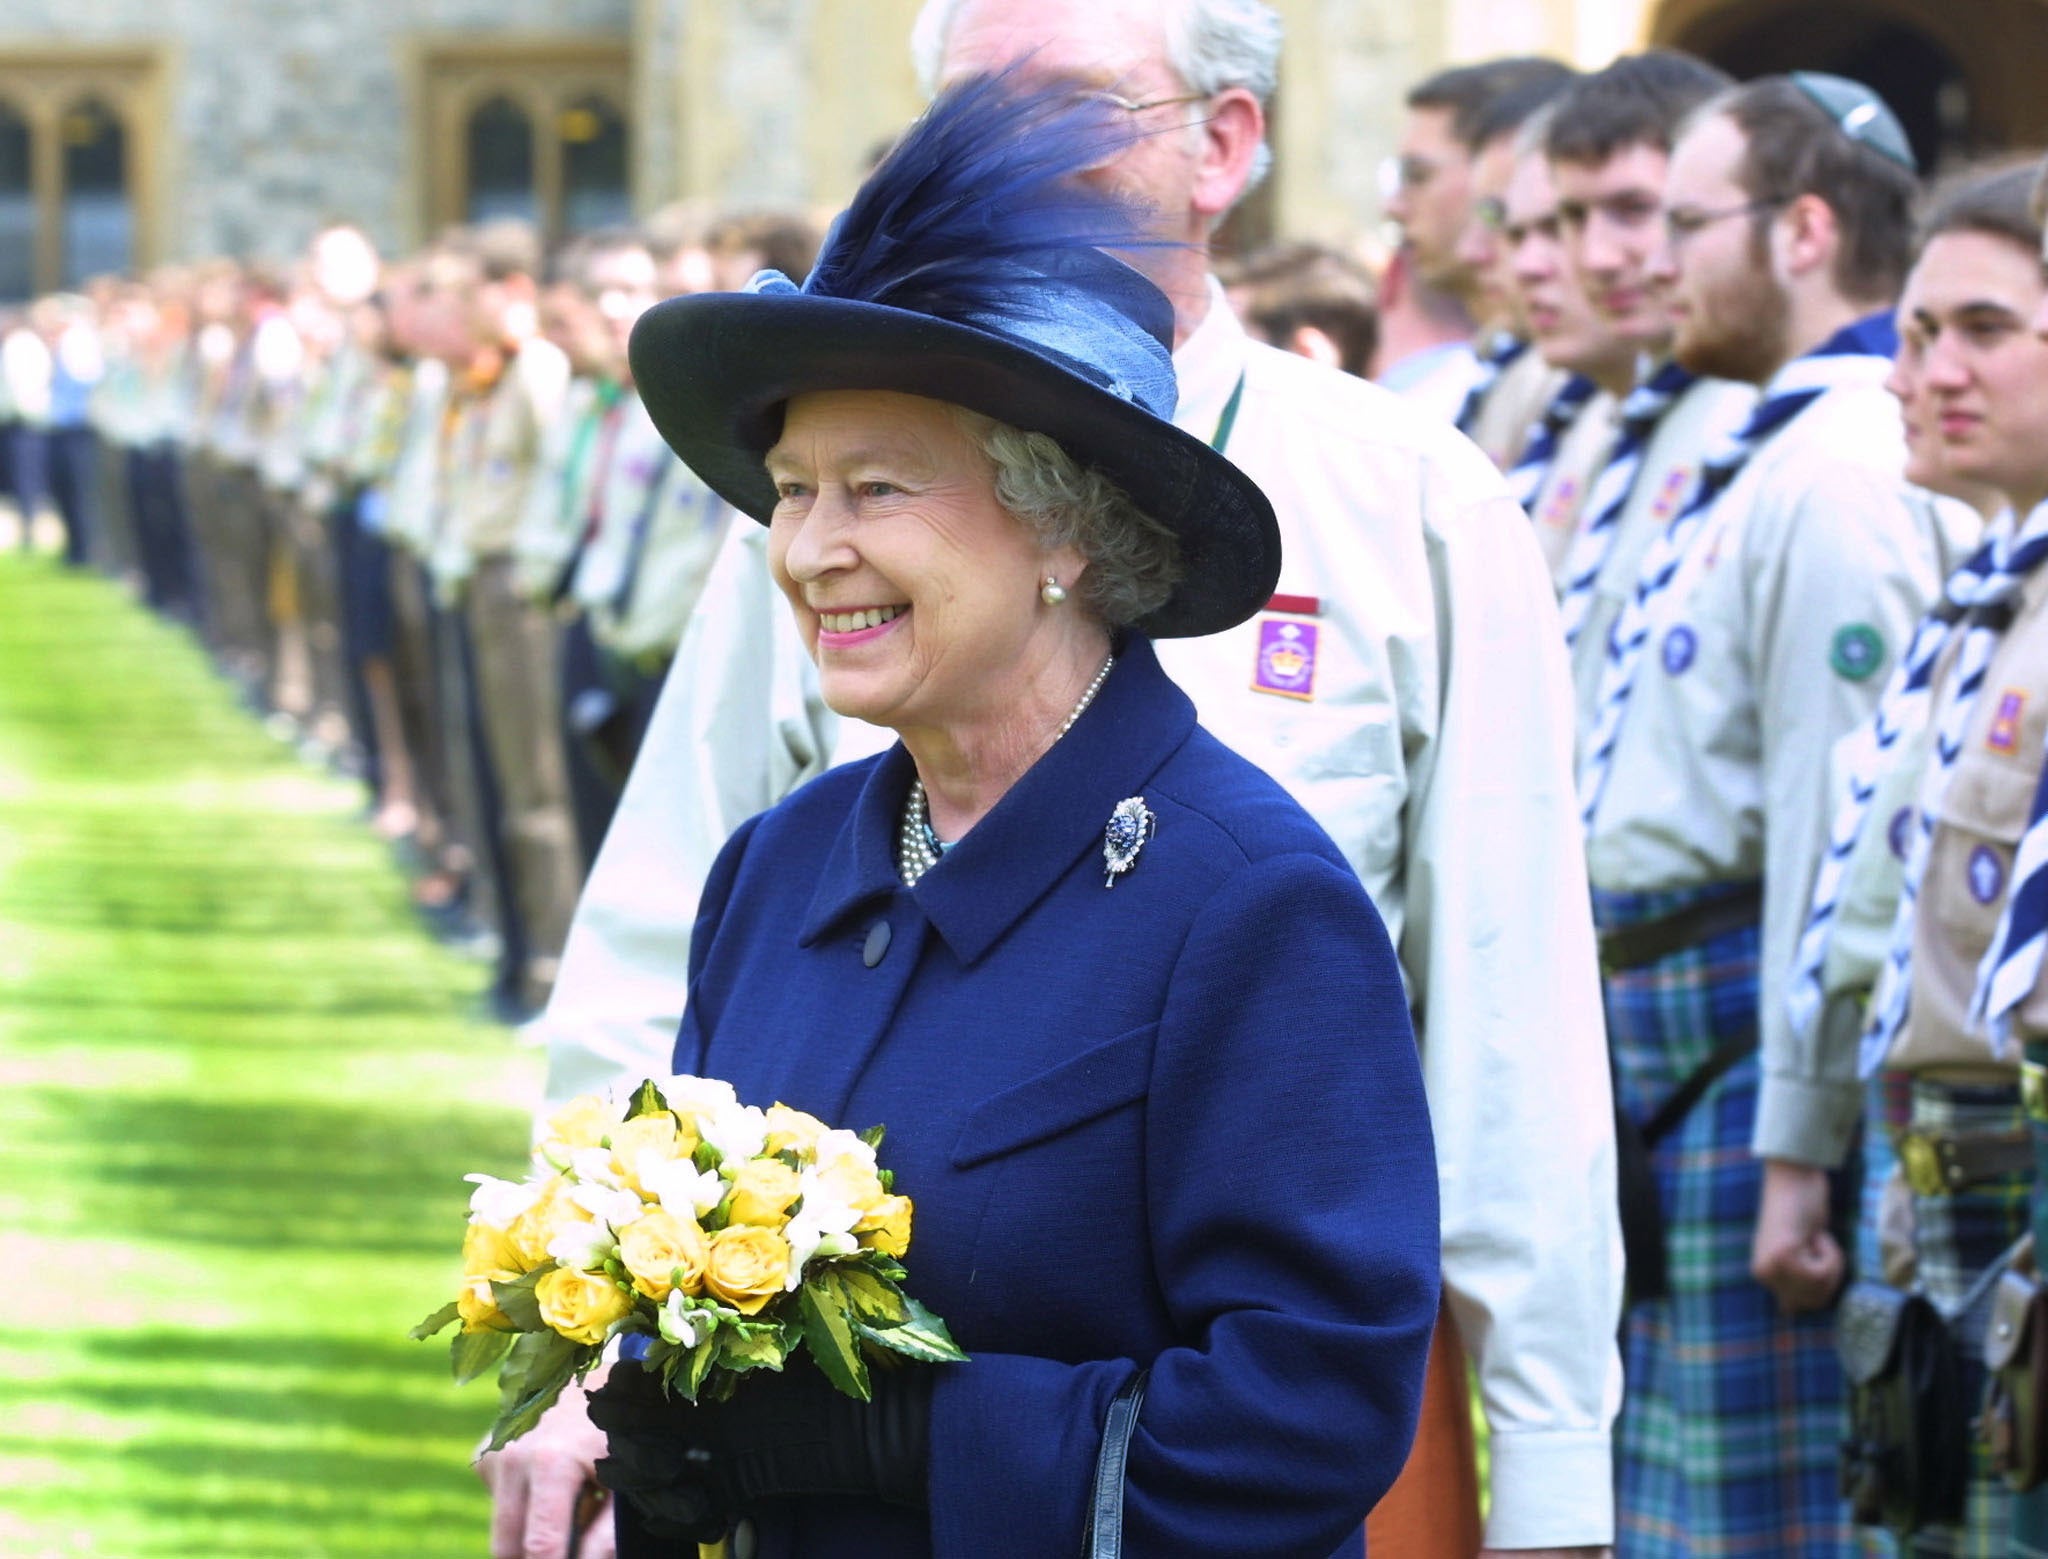 The Queen passed away on Thursday in Balmoral